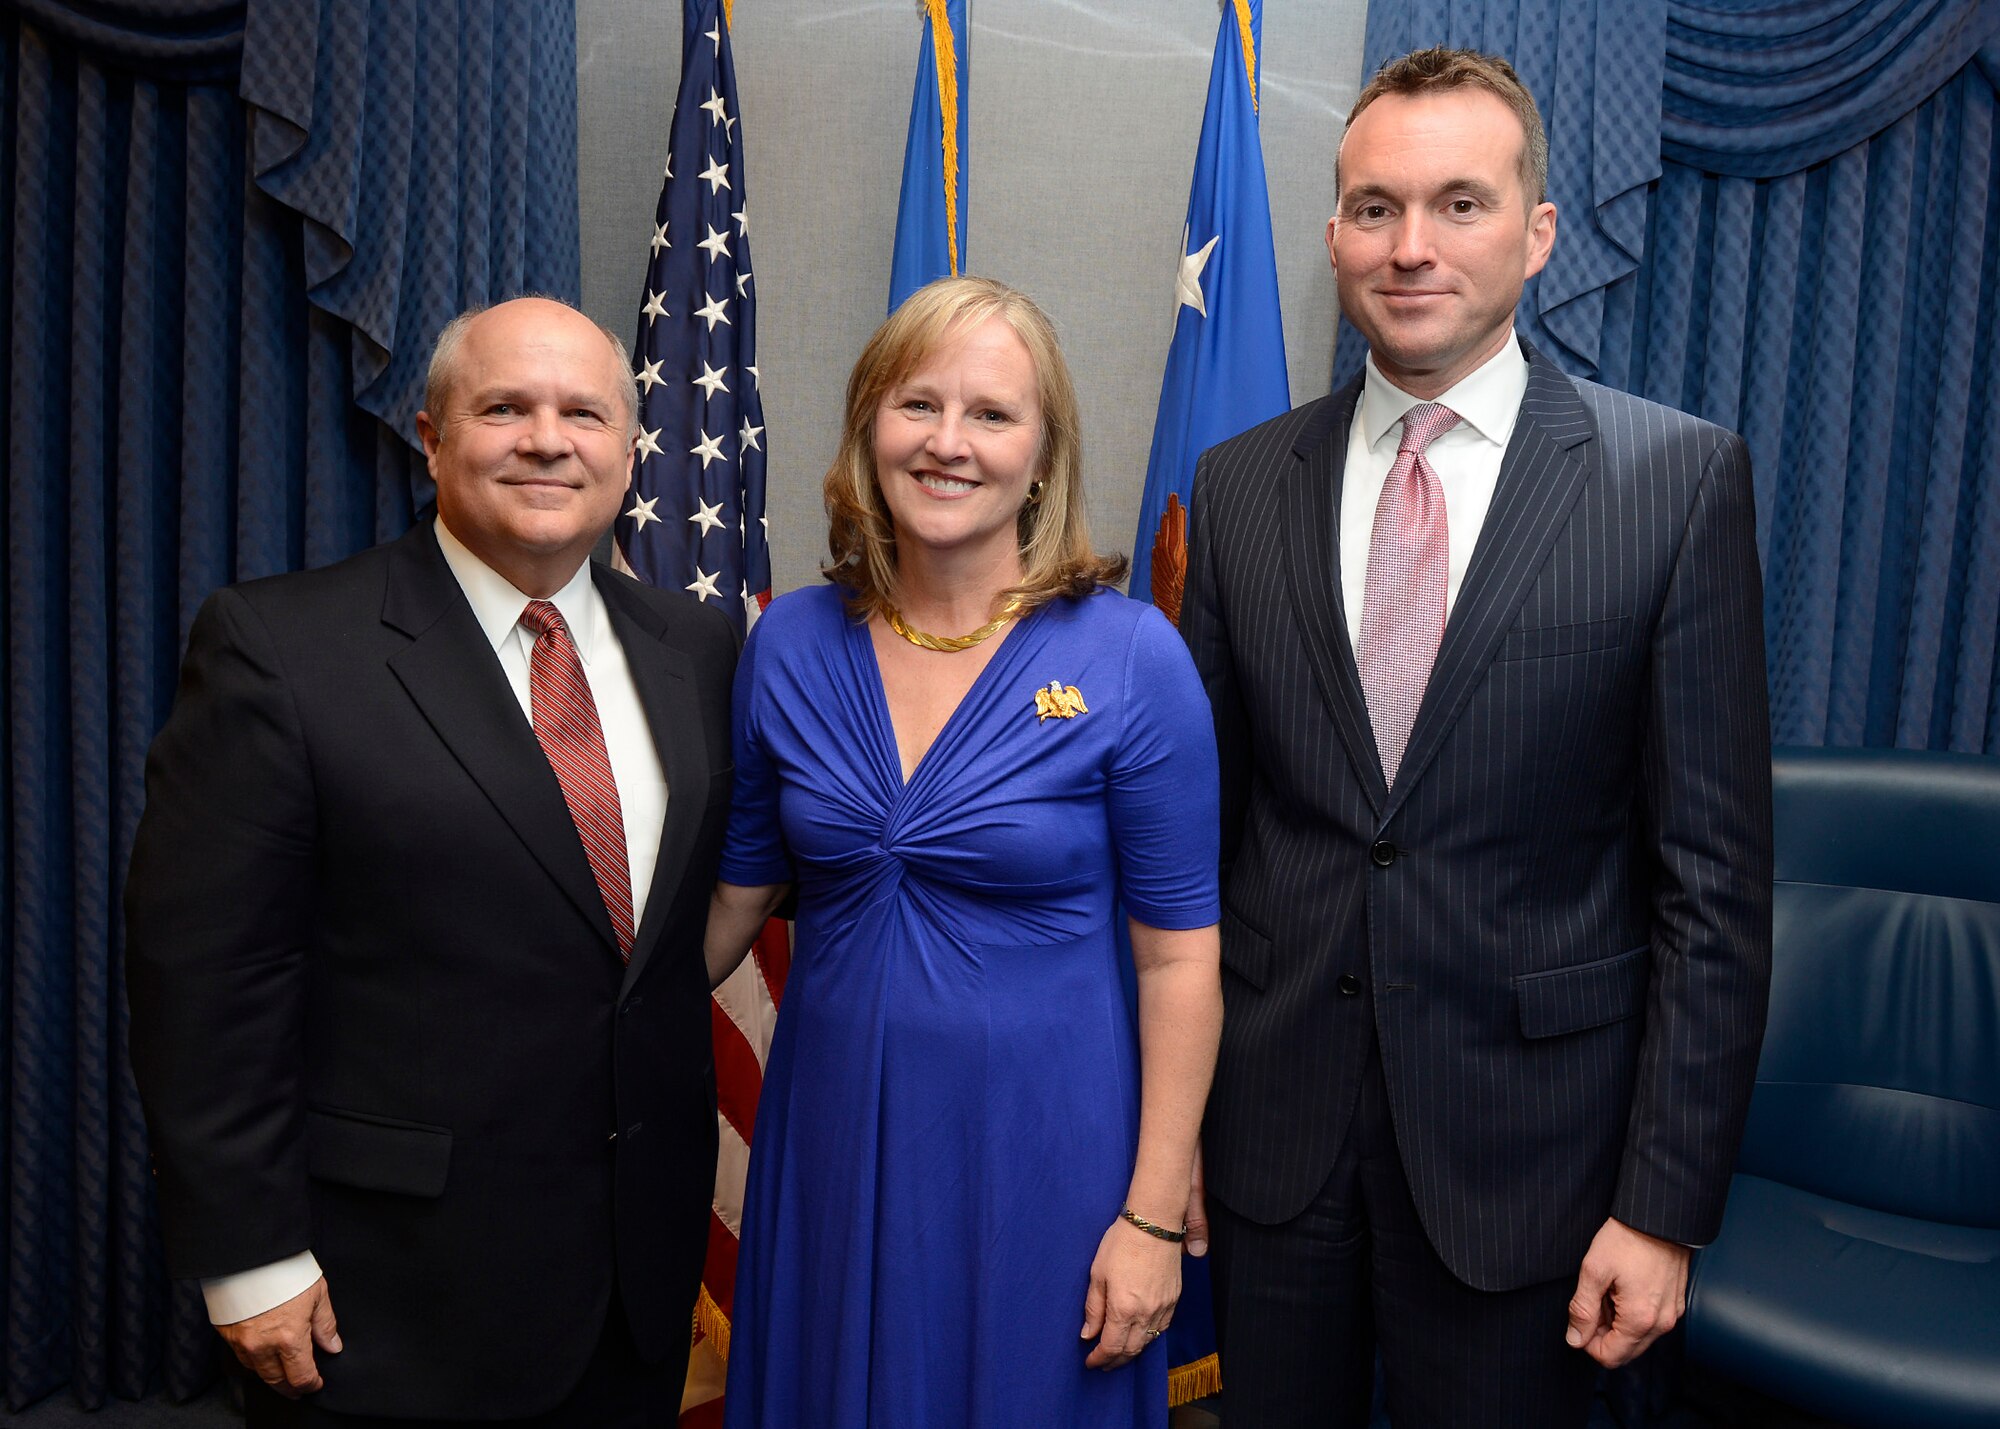 Acting Secretary of the Air Force Eric Fanning (right) congratulates retired Maj. Gen Charles Lyon and his wife, Karen, after presenting Lyon the Zuckert Management award during a Pentagon ceremony, Nov. 18, 2013.  The Zuckert Management Award is named after the seventh secretary of the Air Force and is presented annually to recognize outstanding top-level Air Force managers.  (U.S. Air Force photo/Scott M. Ash)